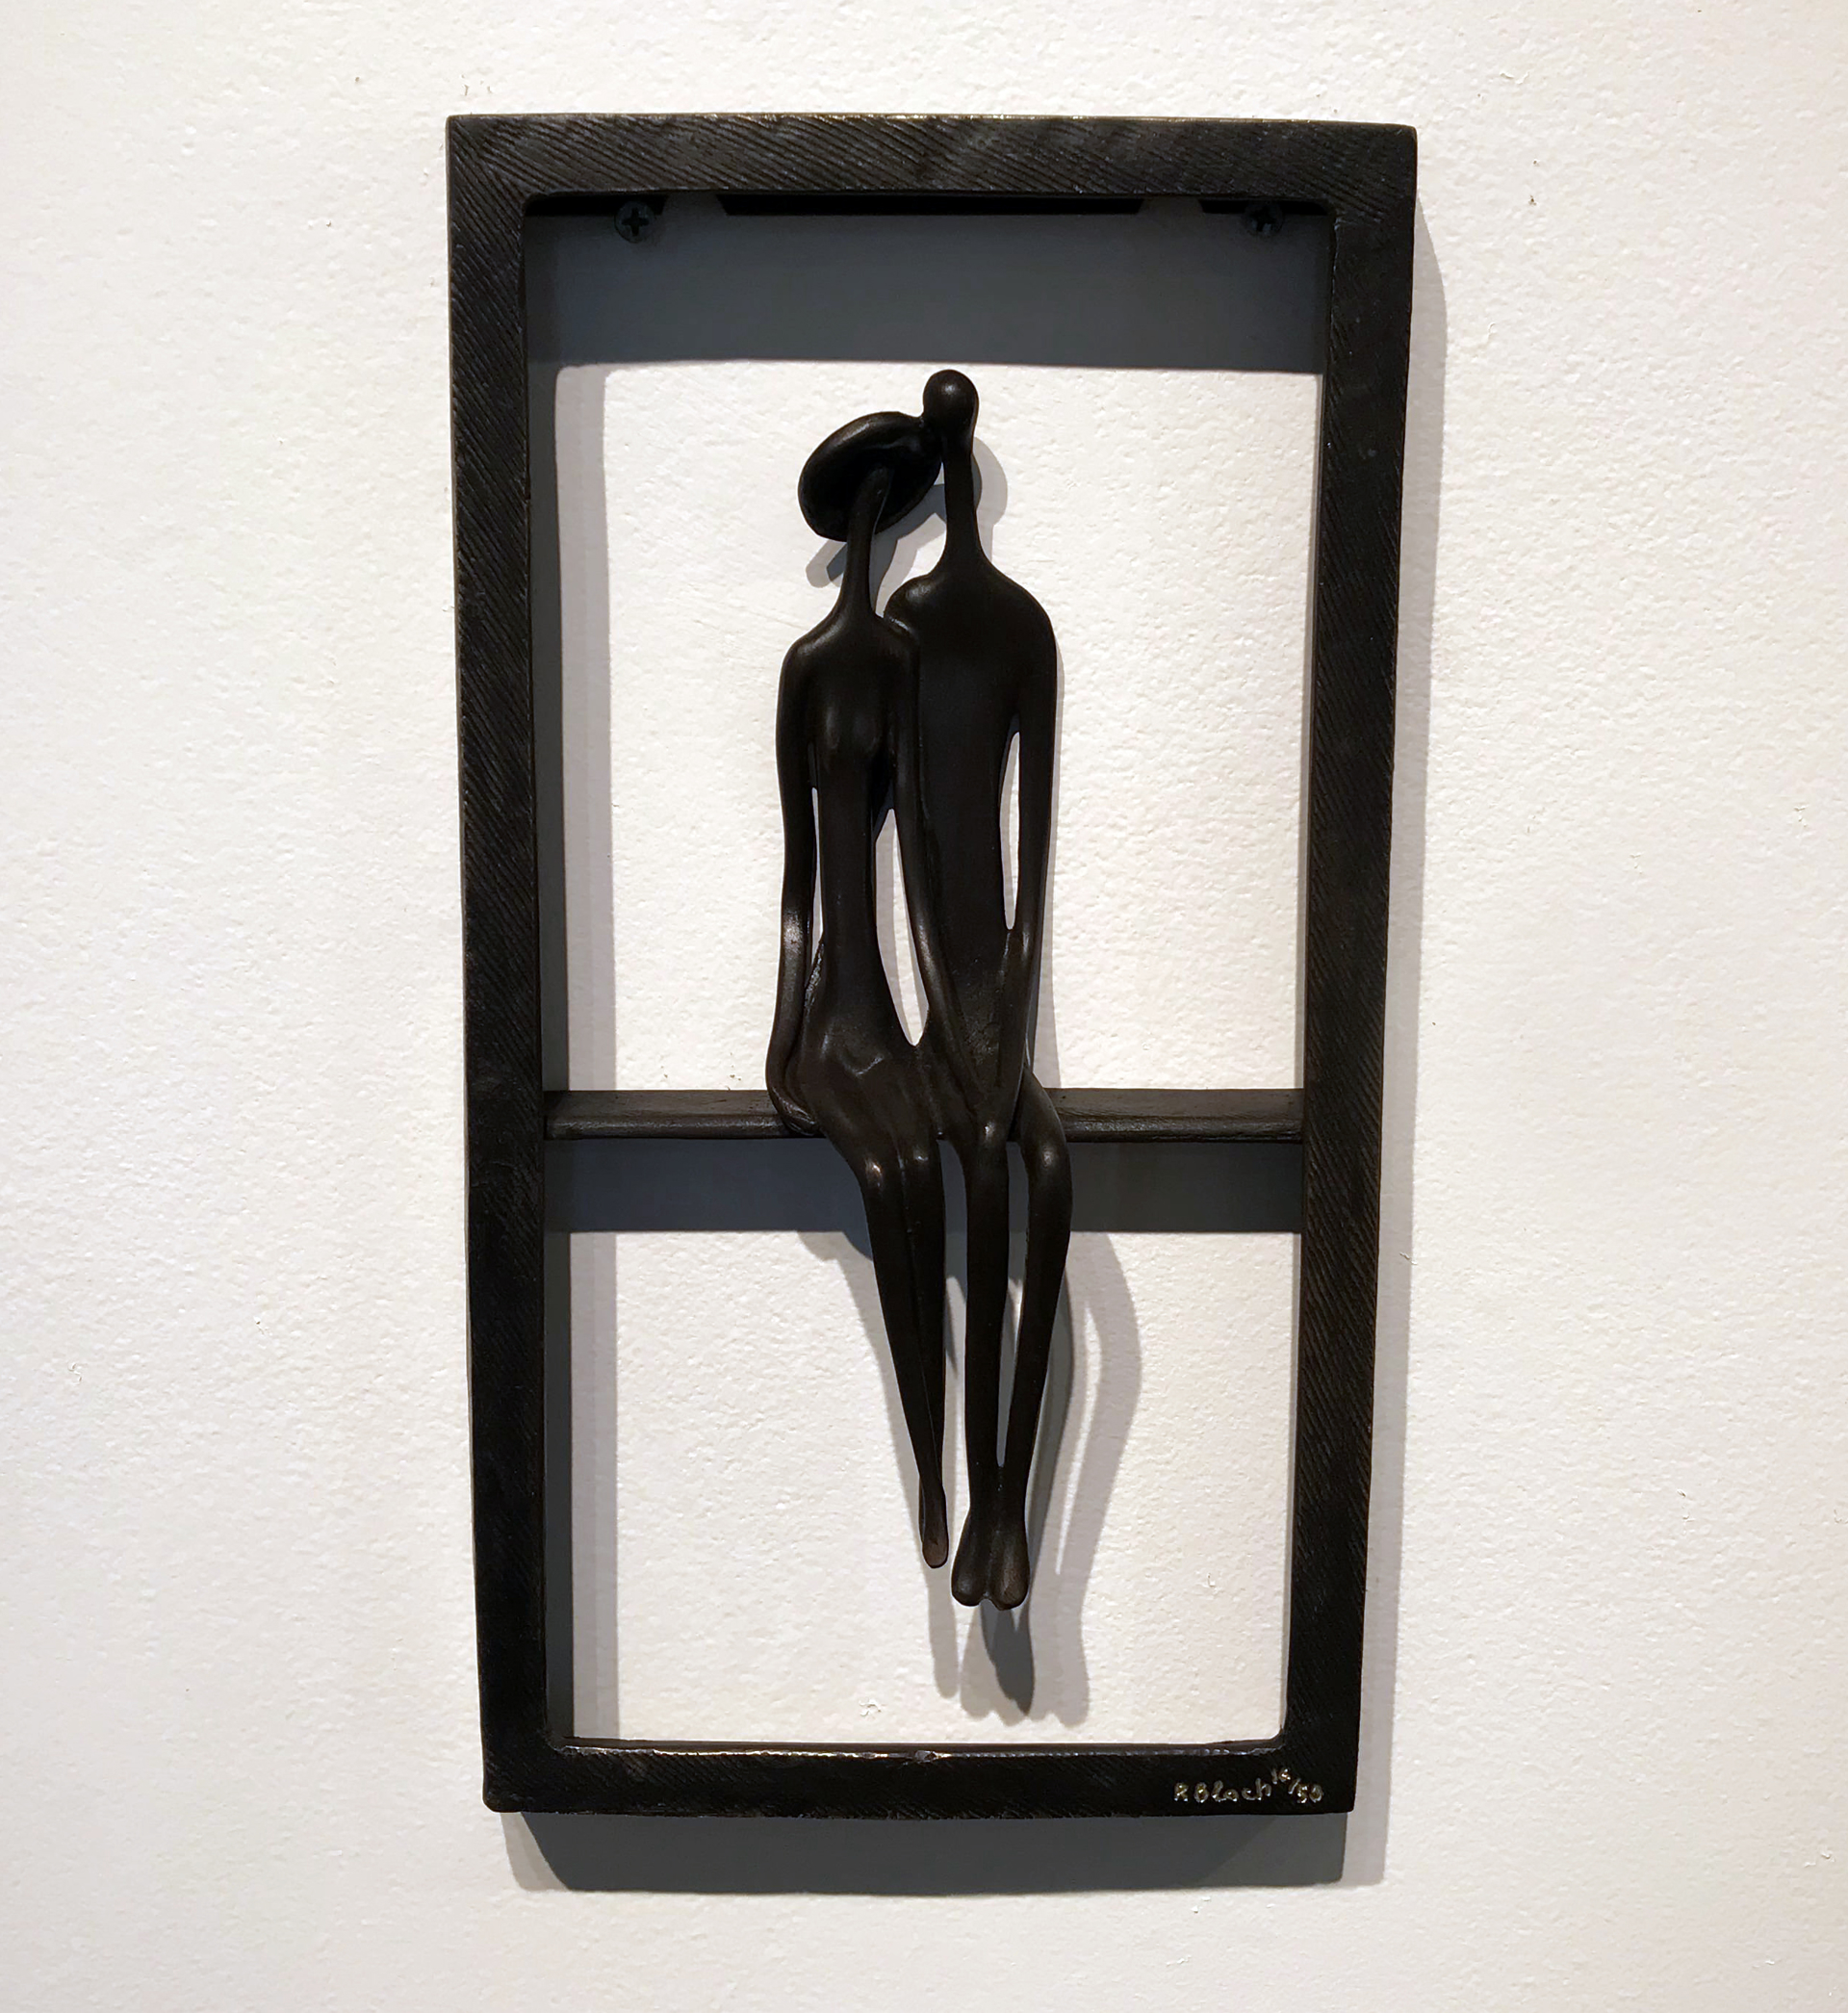 Wall Sculpture (Small 16/50) by Ruth Bloch